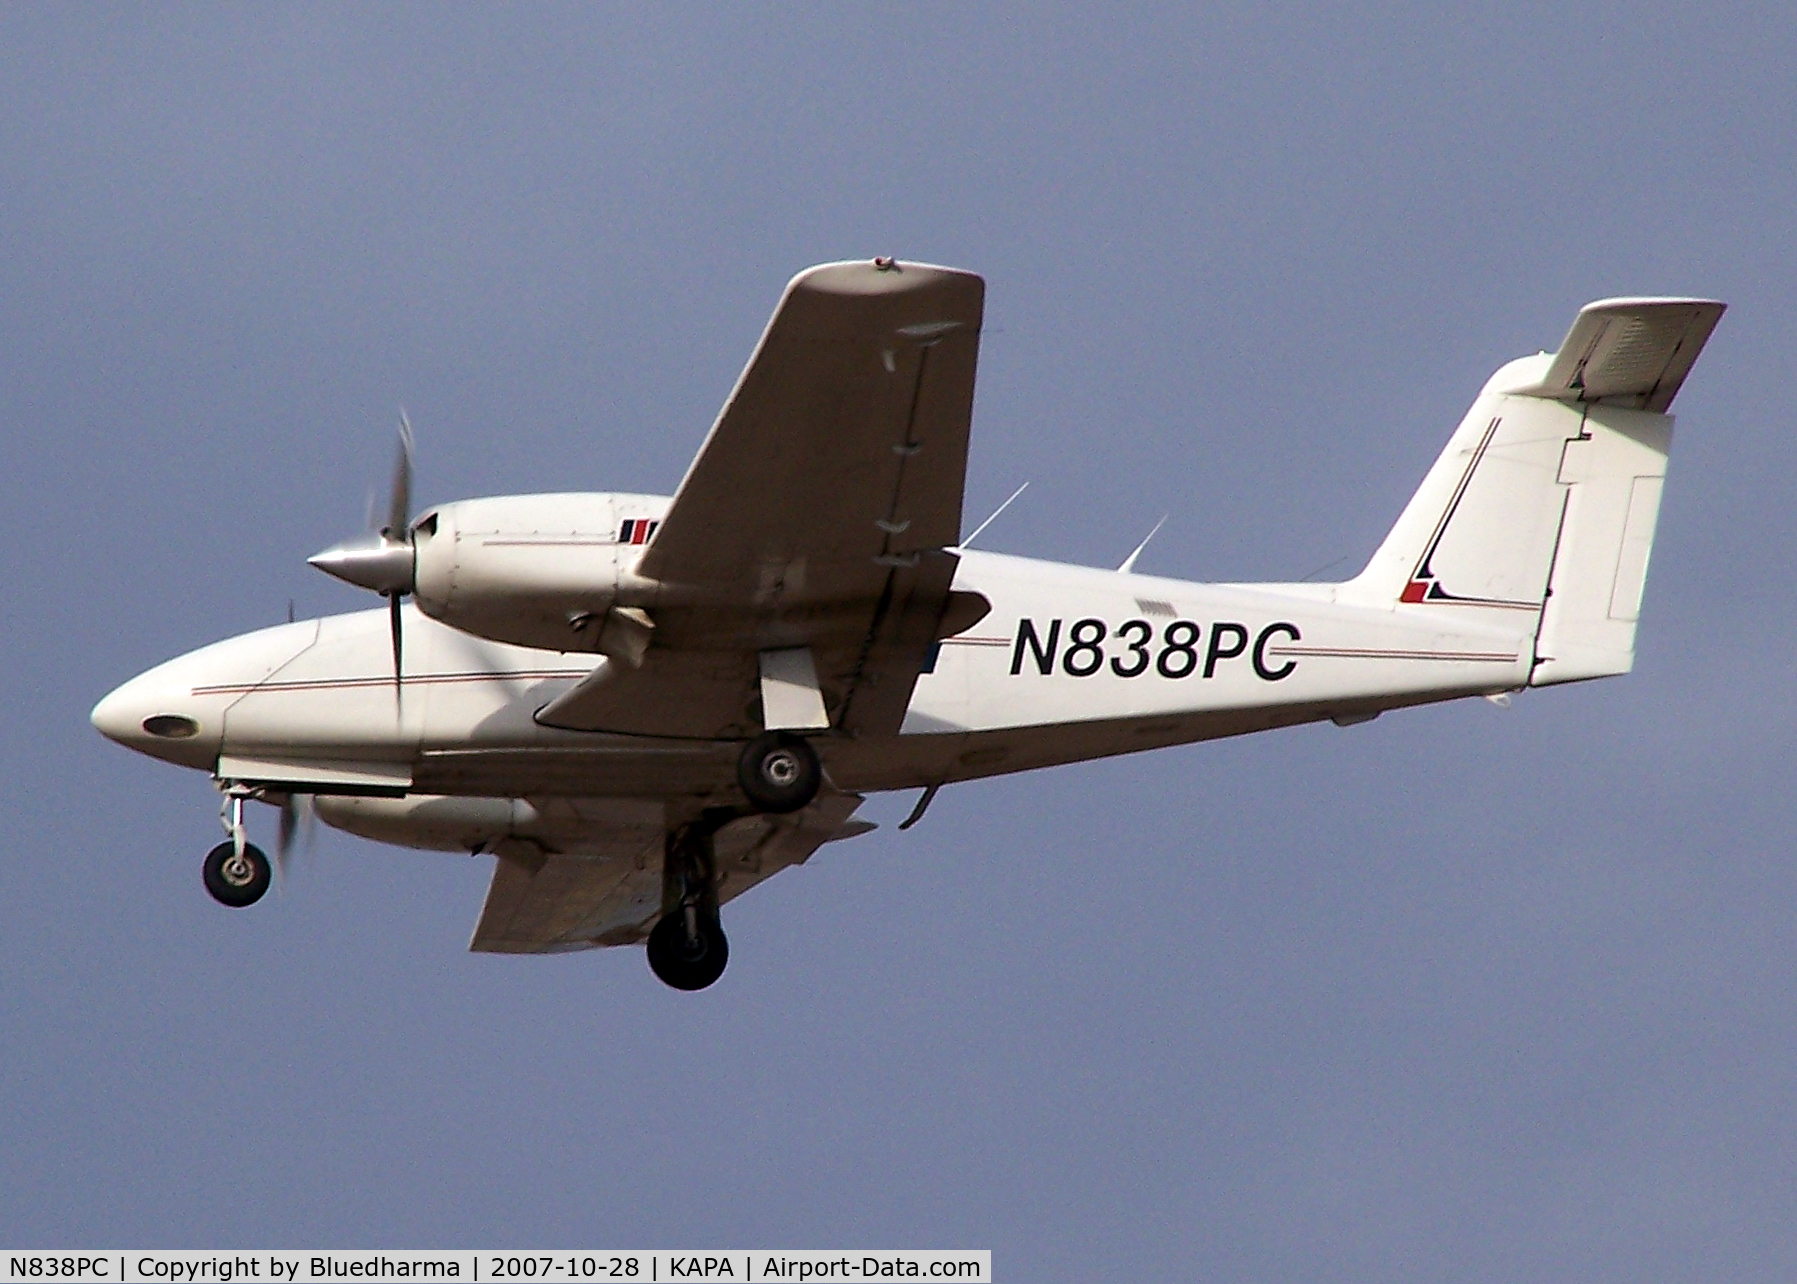 N838PC, 1981 Piper PA-44-180T Turbo Seminole C/N 44-8107056, Approach to 17L (touch and go)